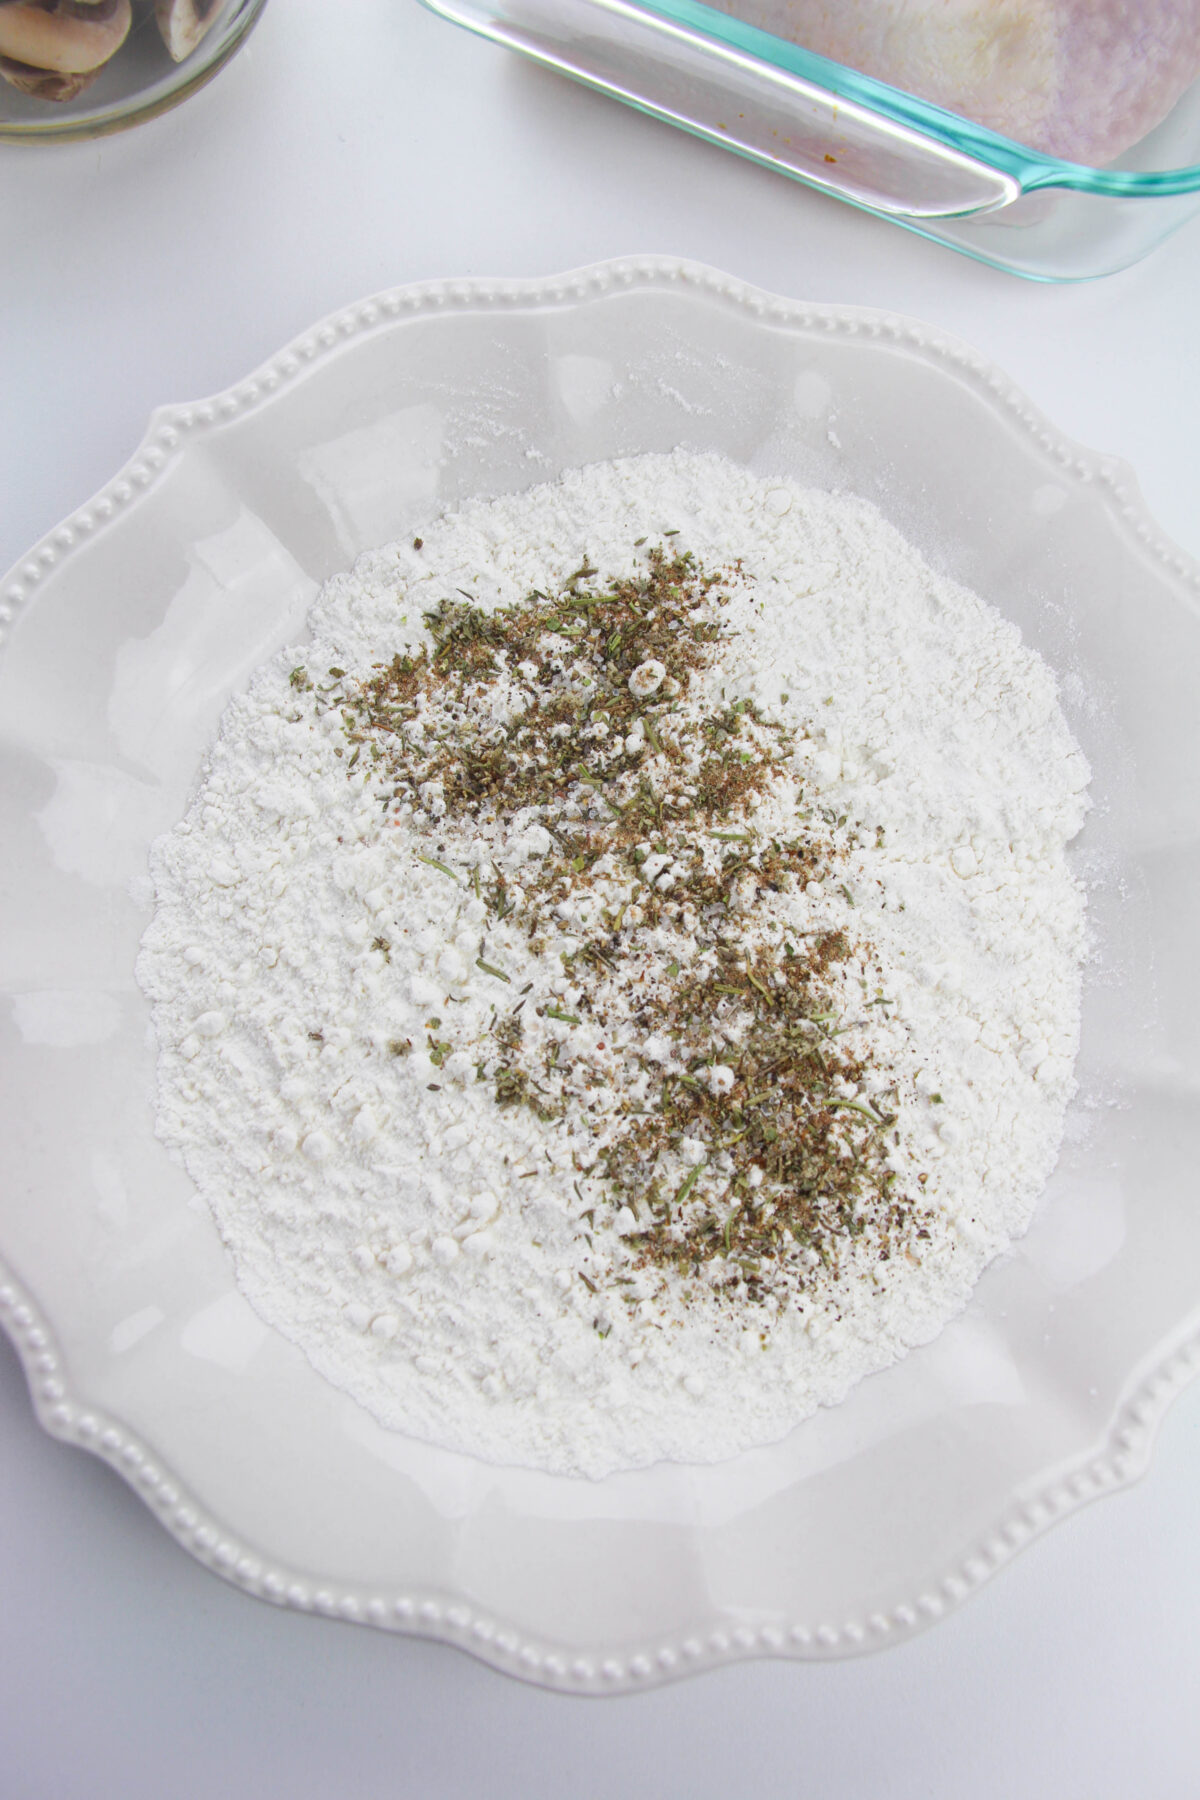 Flour and seasoning in a bowl